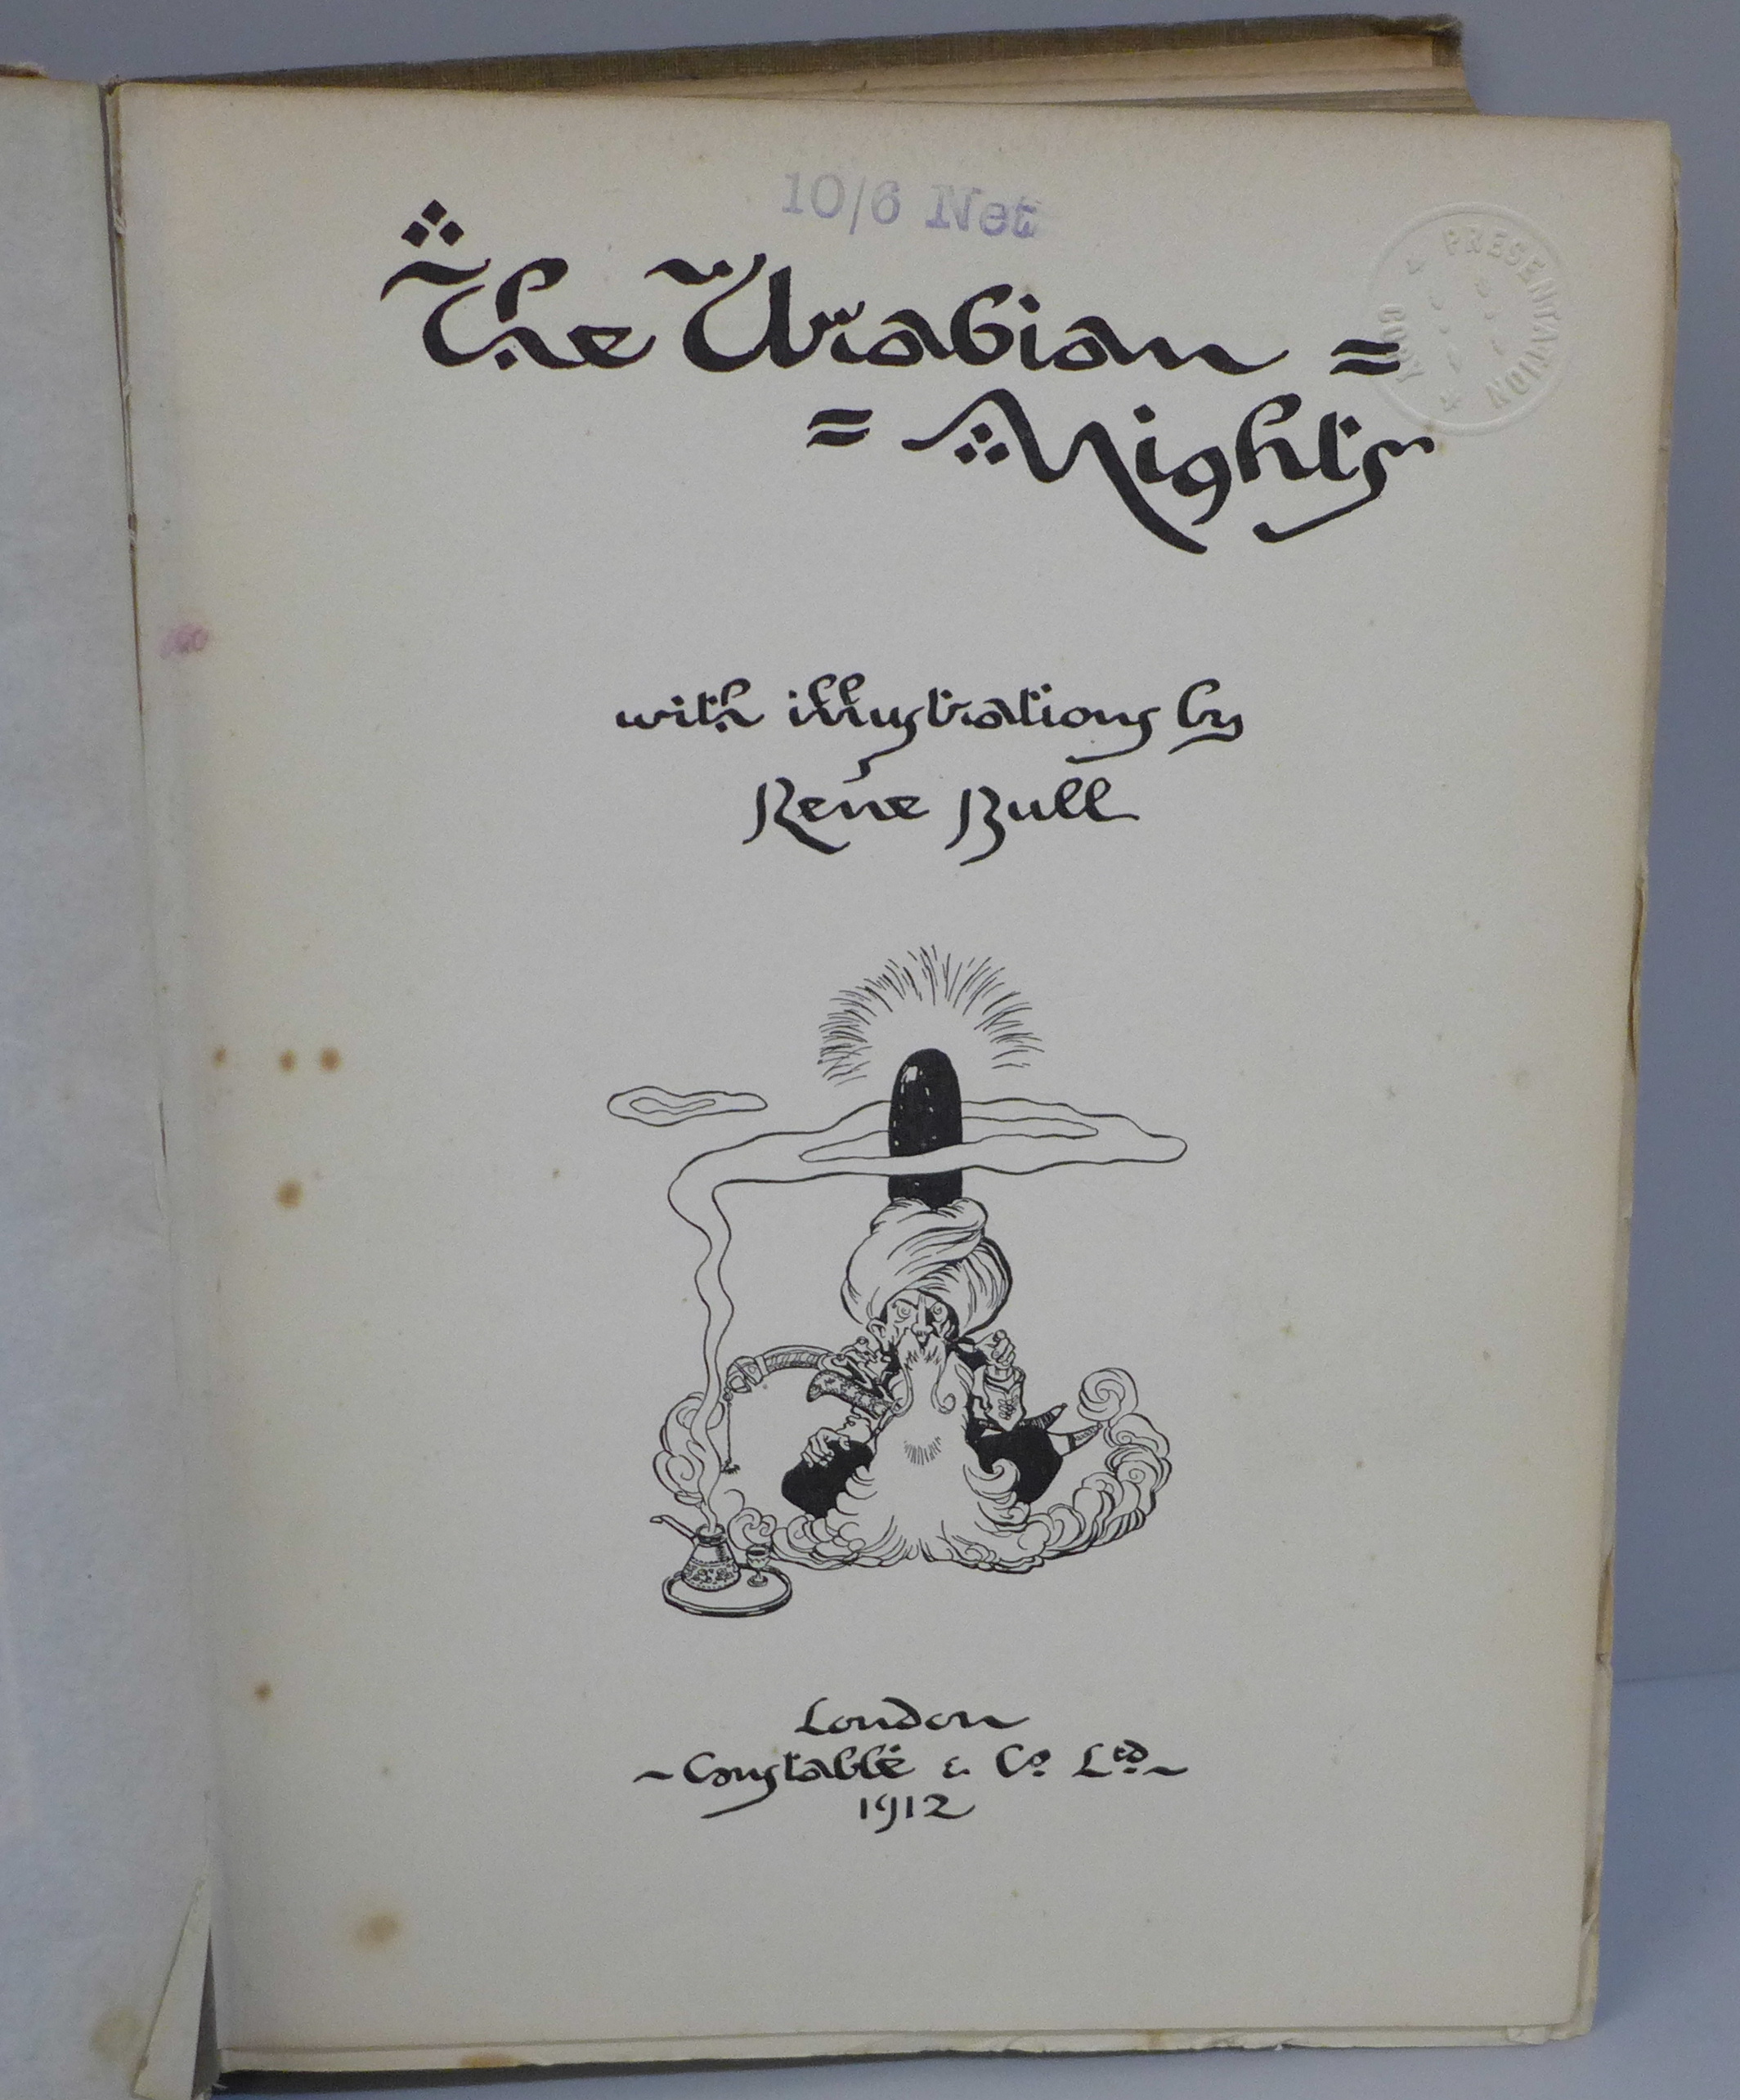 An Arabian Nights book with illustrations by Rene Bull, London, Constable & Co. Ltd. 1912, spine a/f - Image 3 of 9